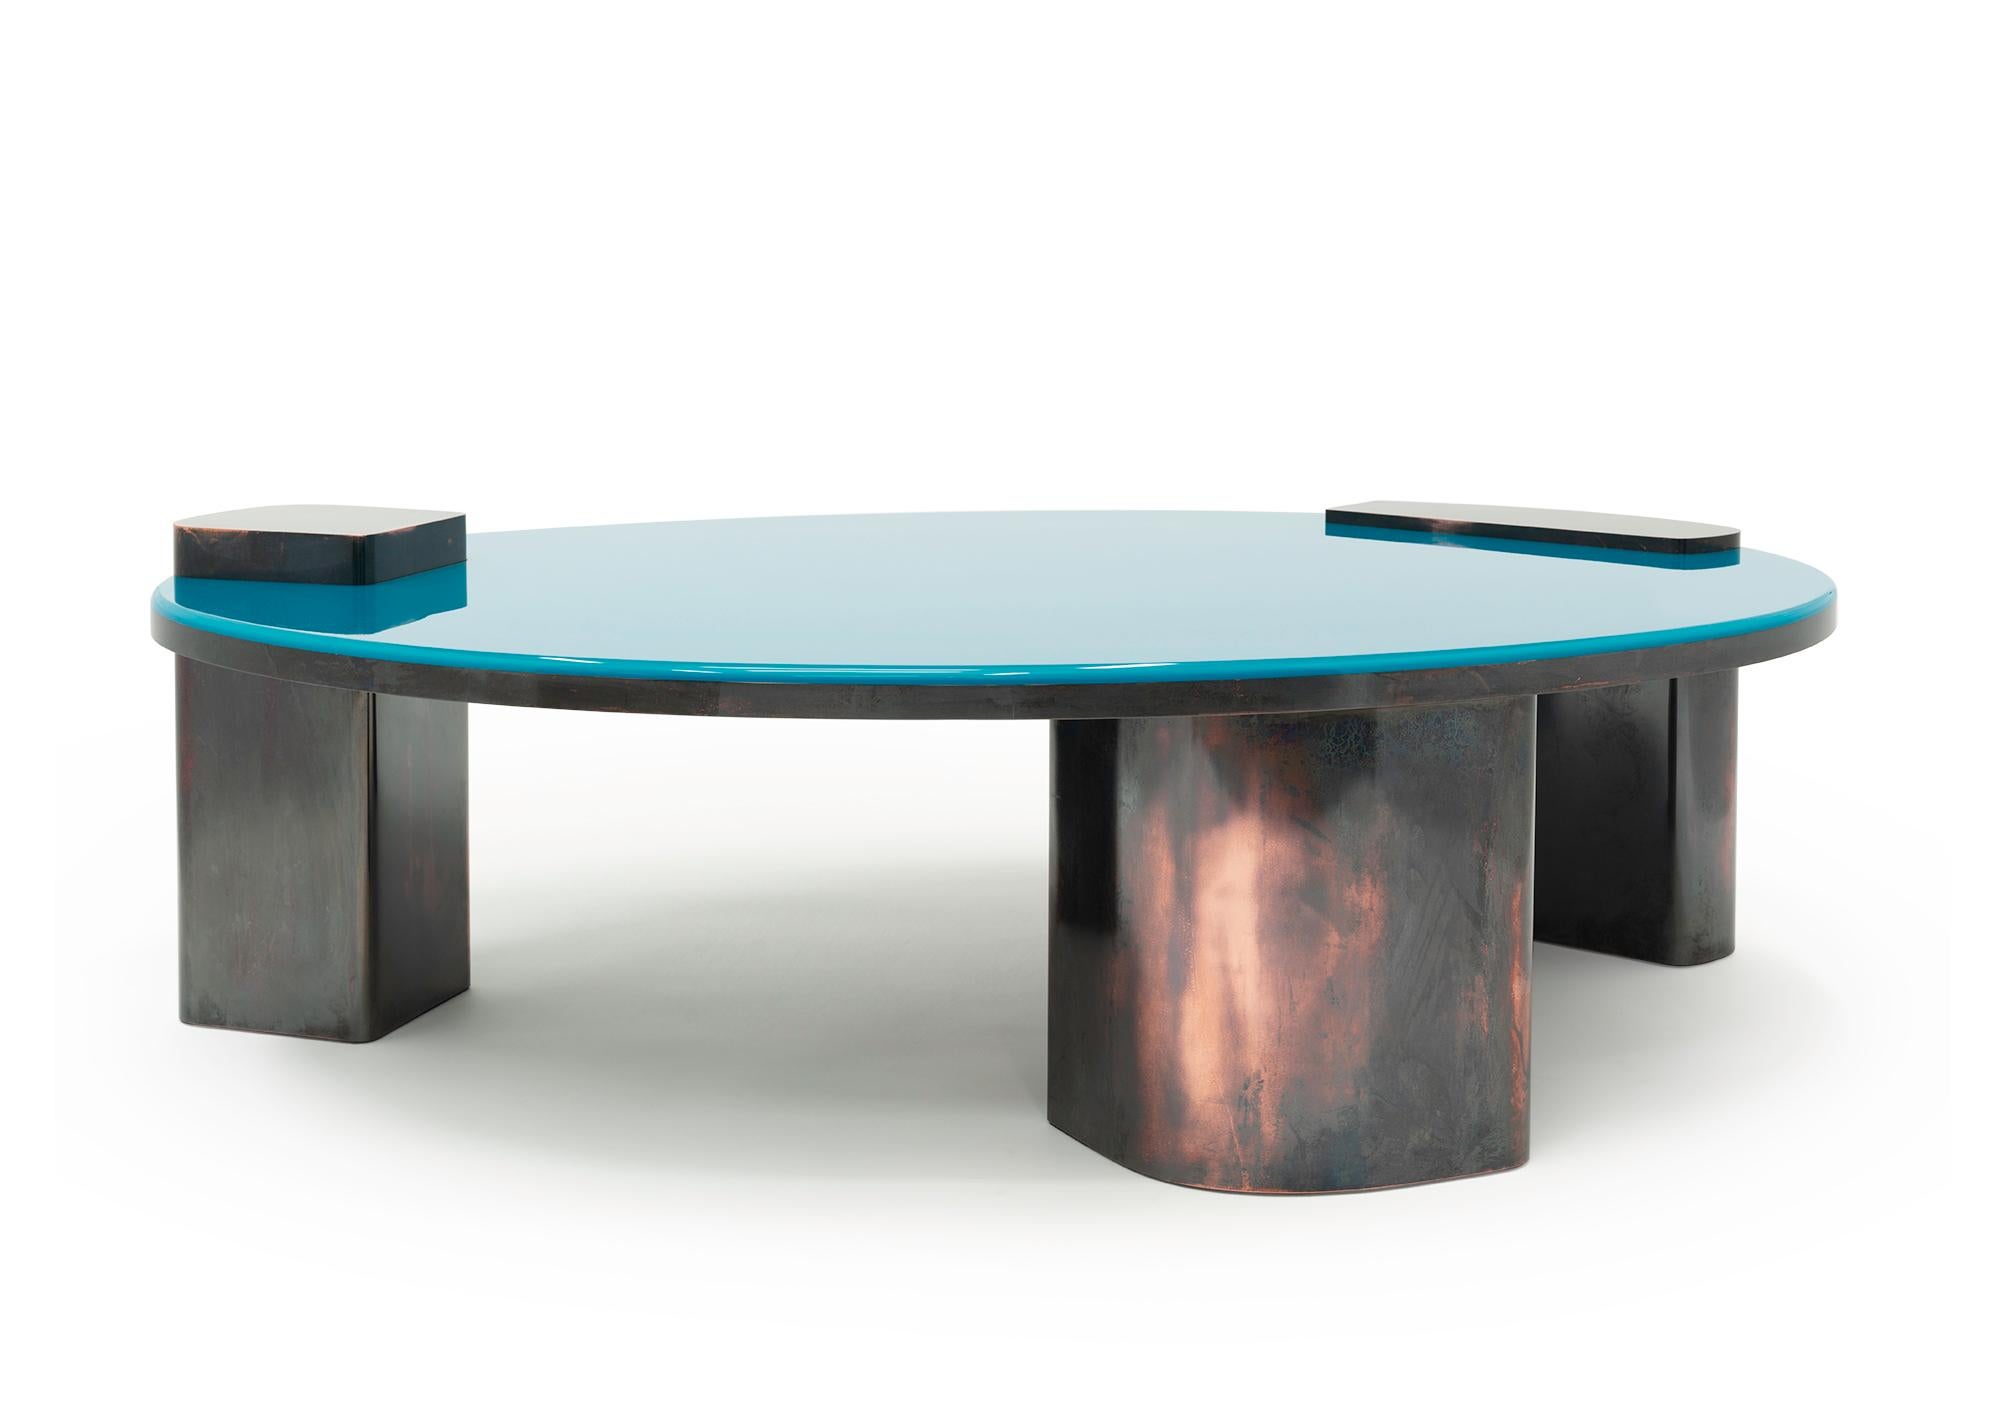 Blue Moon MMXIX - 21st century modern copper and blue resin oval coffee table

Supernatural, seldom, even absurd, Blue Moon is real and this time you can admire and examine it in detail much longer than ever...Surprising or/and unique? 

Daring